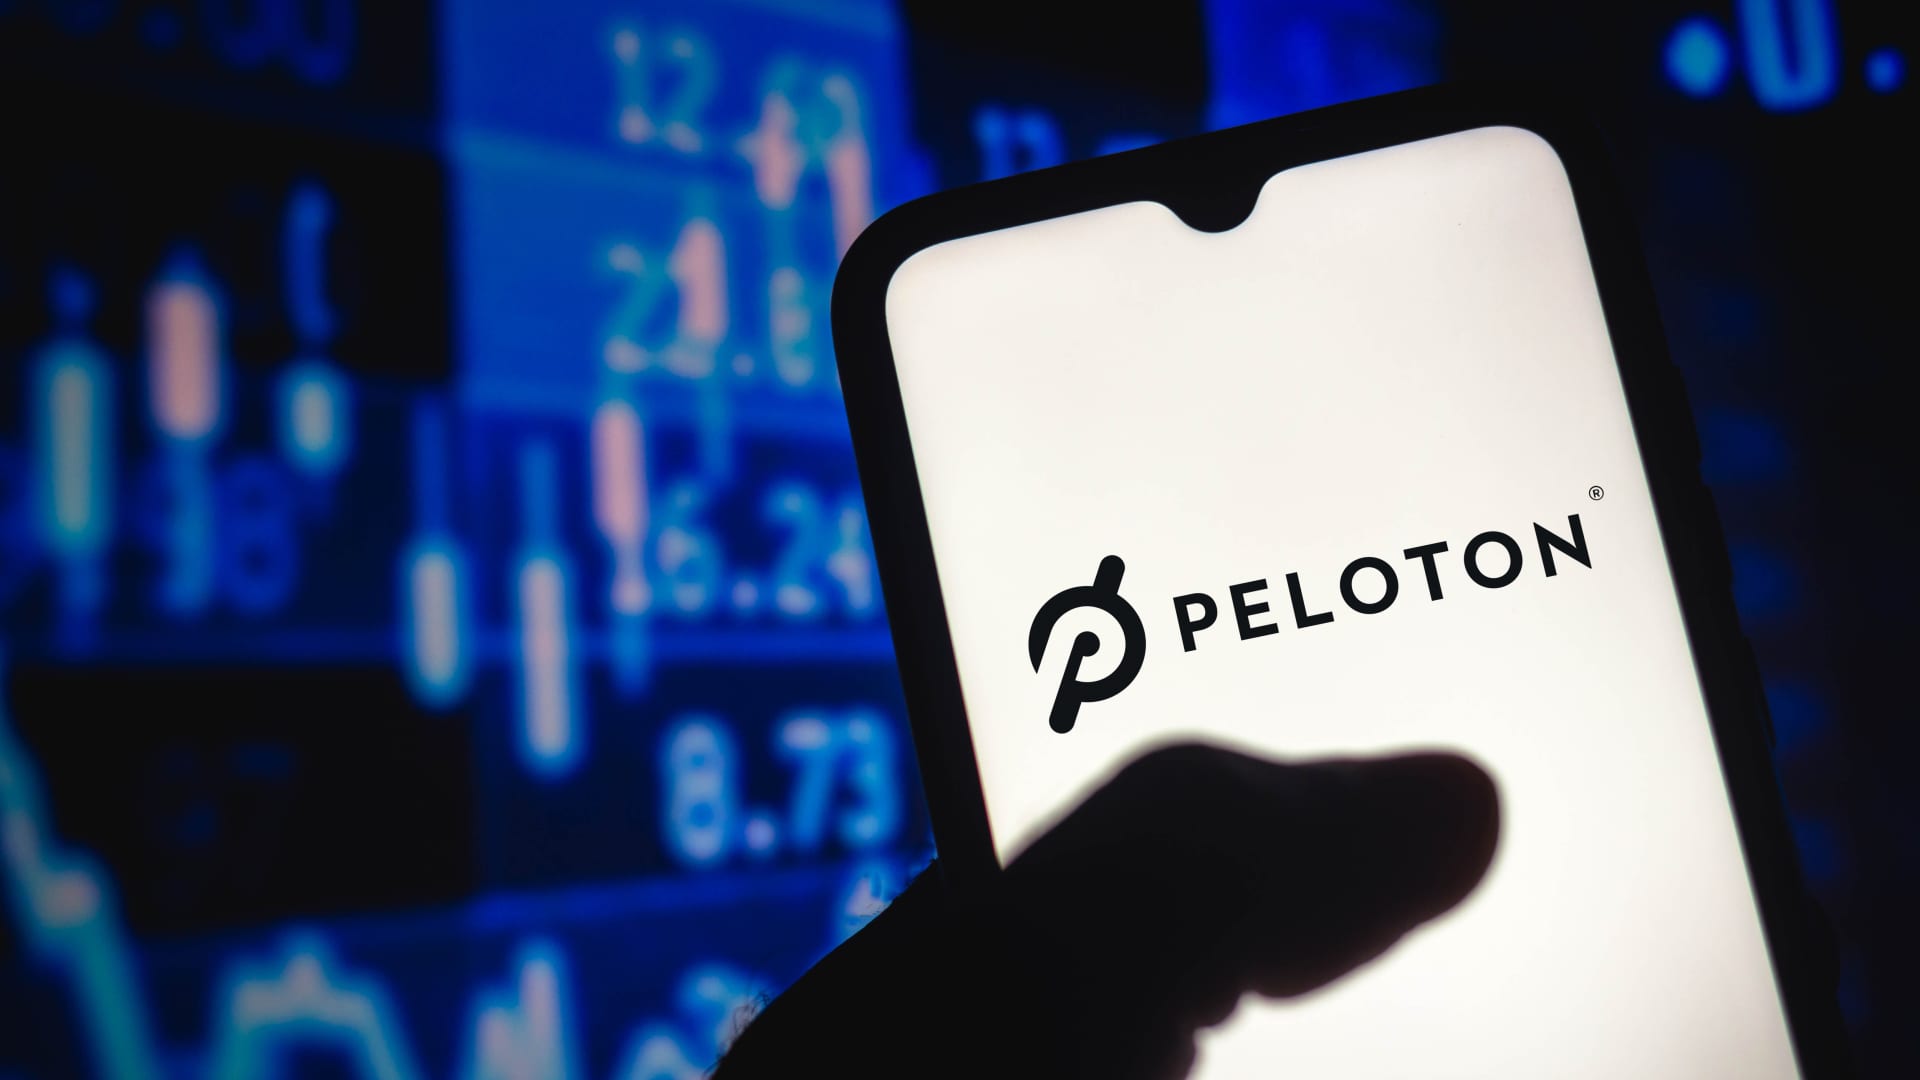 Peloton shares hit all-time low as pressure mounts ahead of earnings